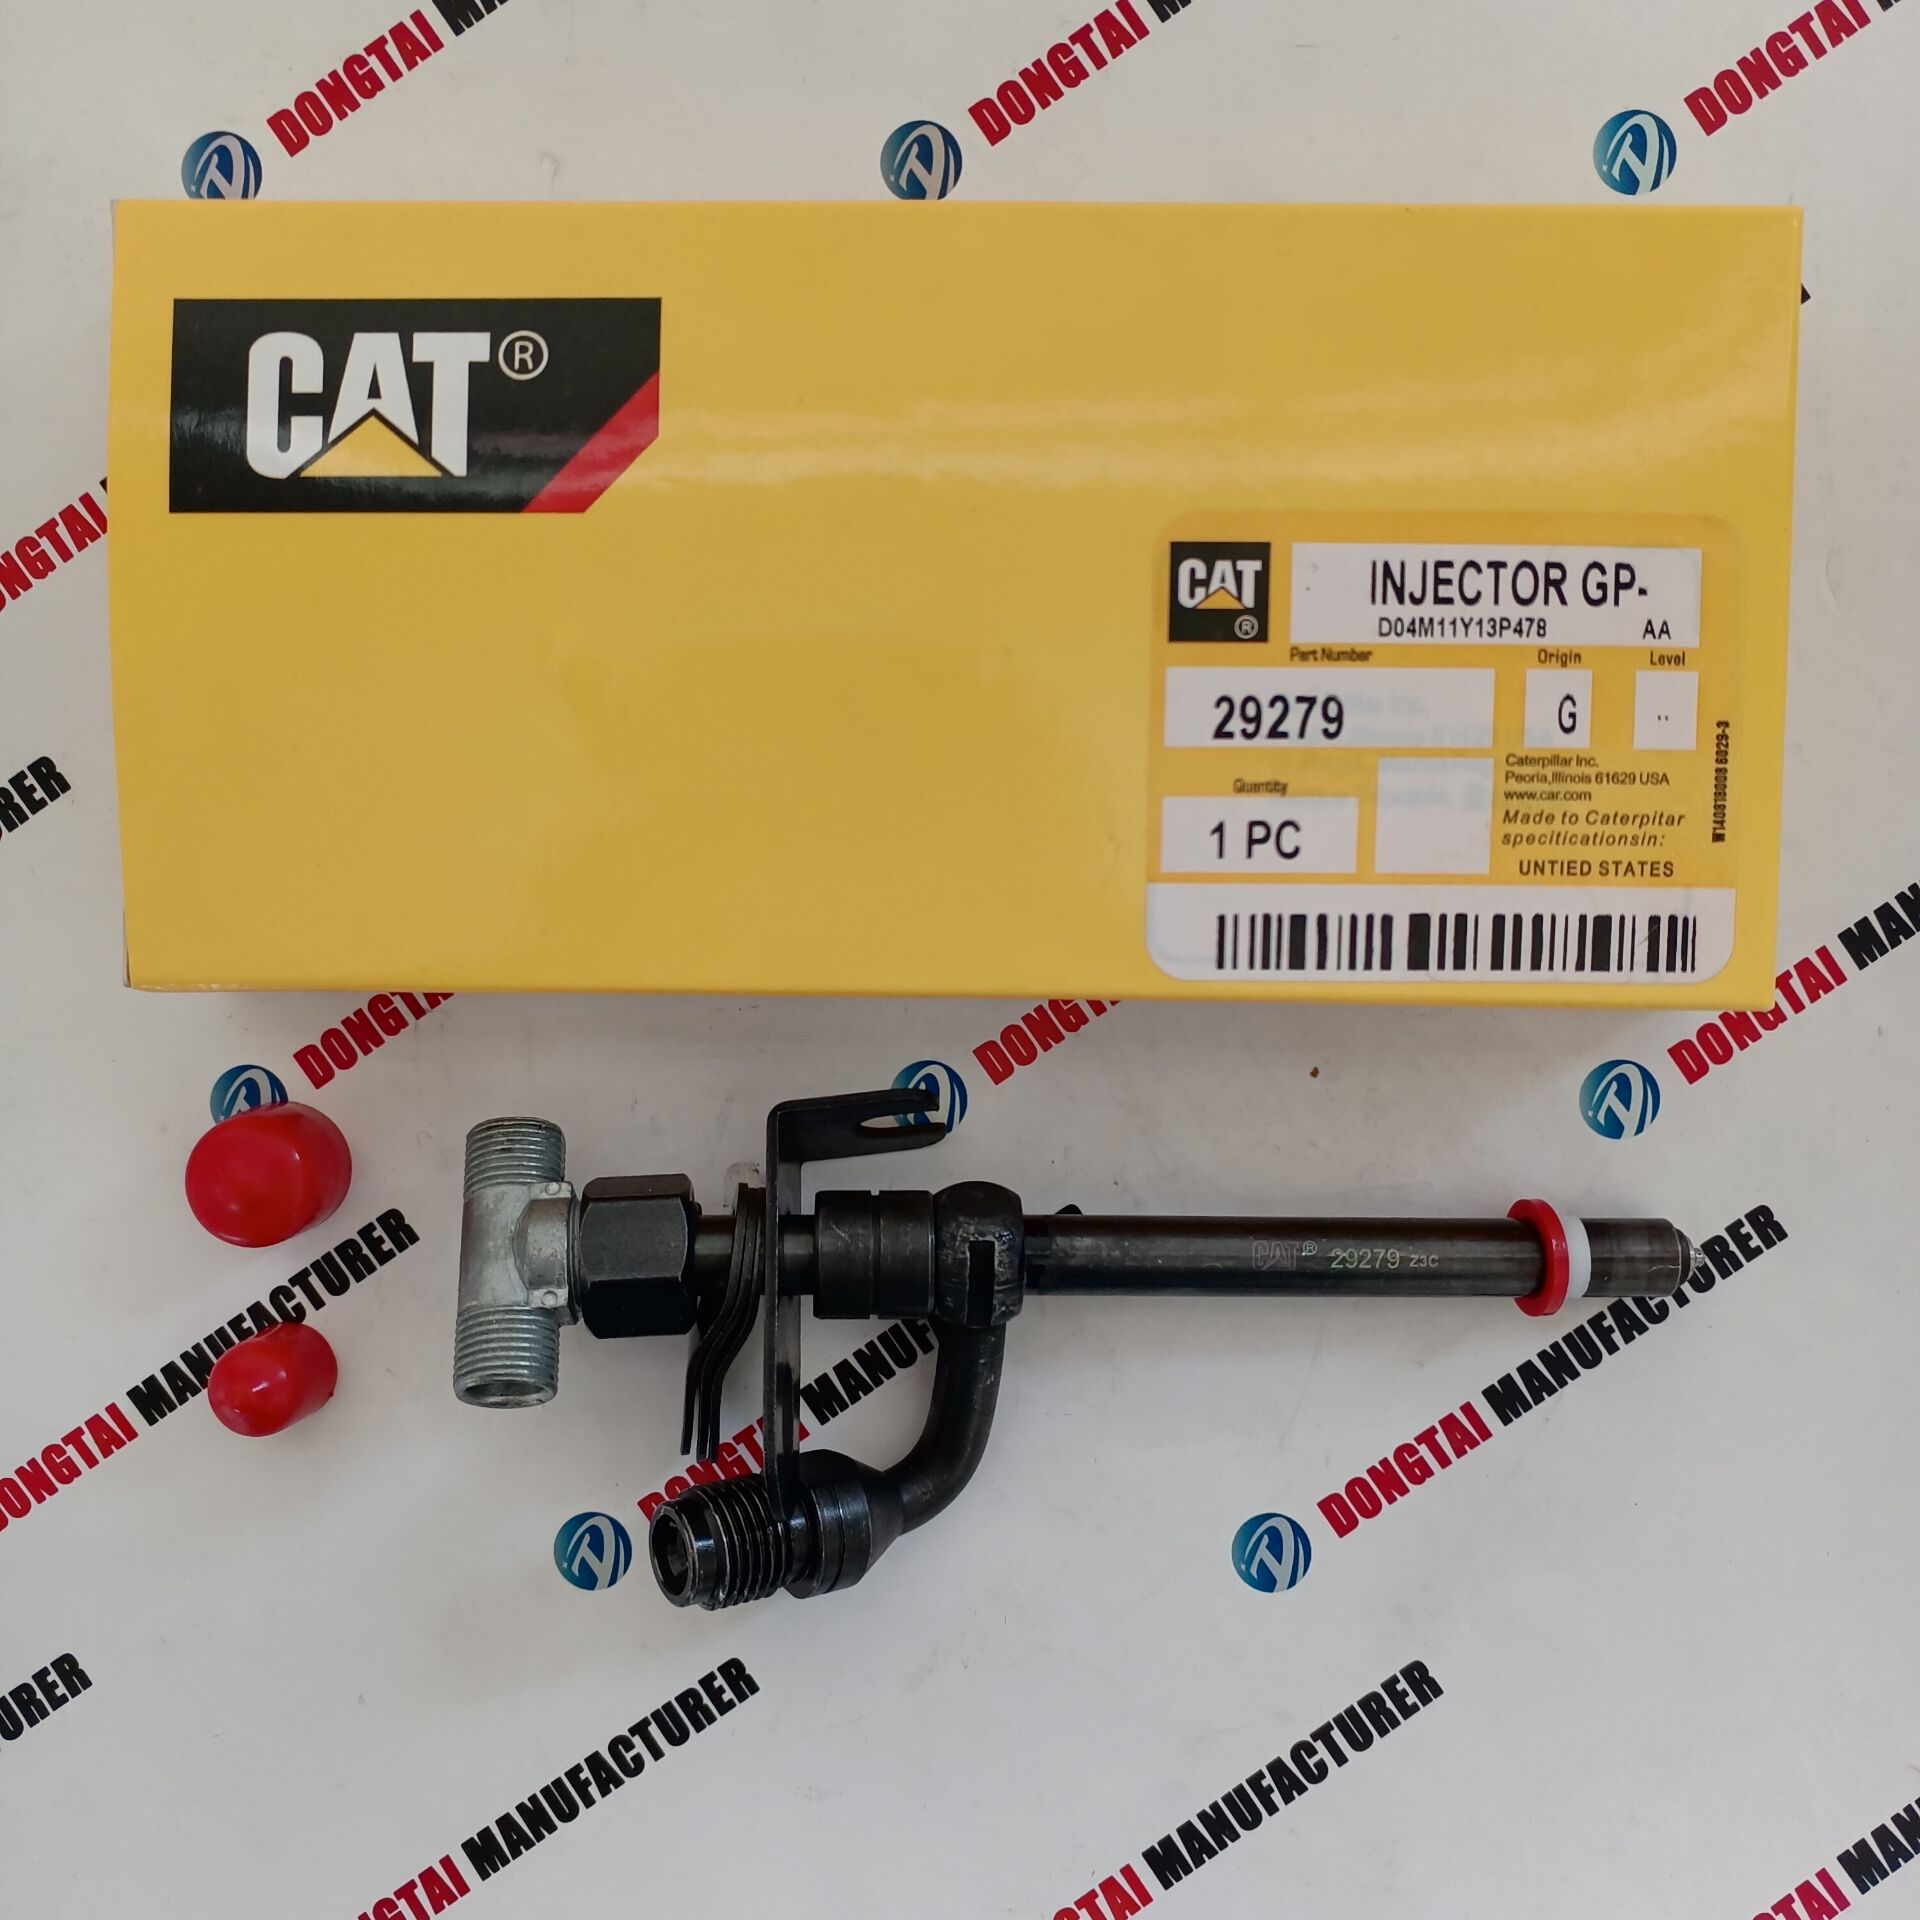 New Fashion Design for Cr Injectors Oil Return Connectors - CAT Pencil Injectors 29279 for John Deere RE48786 RE44508 506898 with the fitting – Dongtai